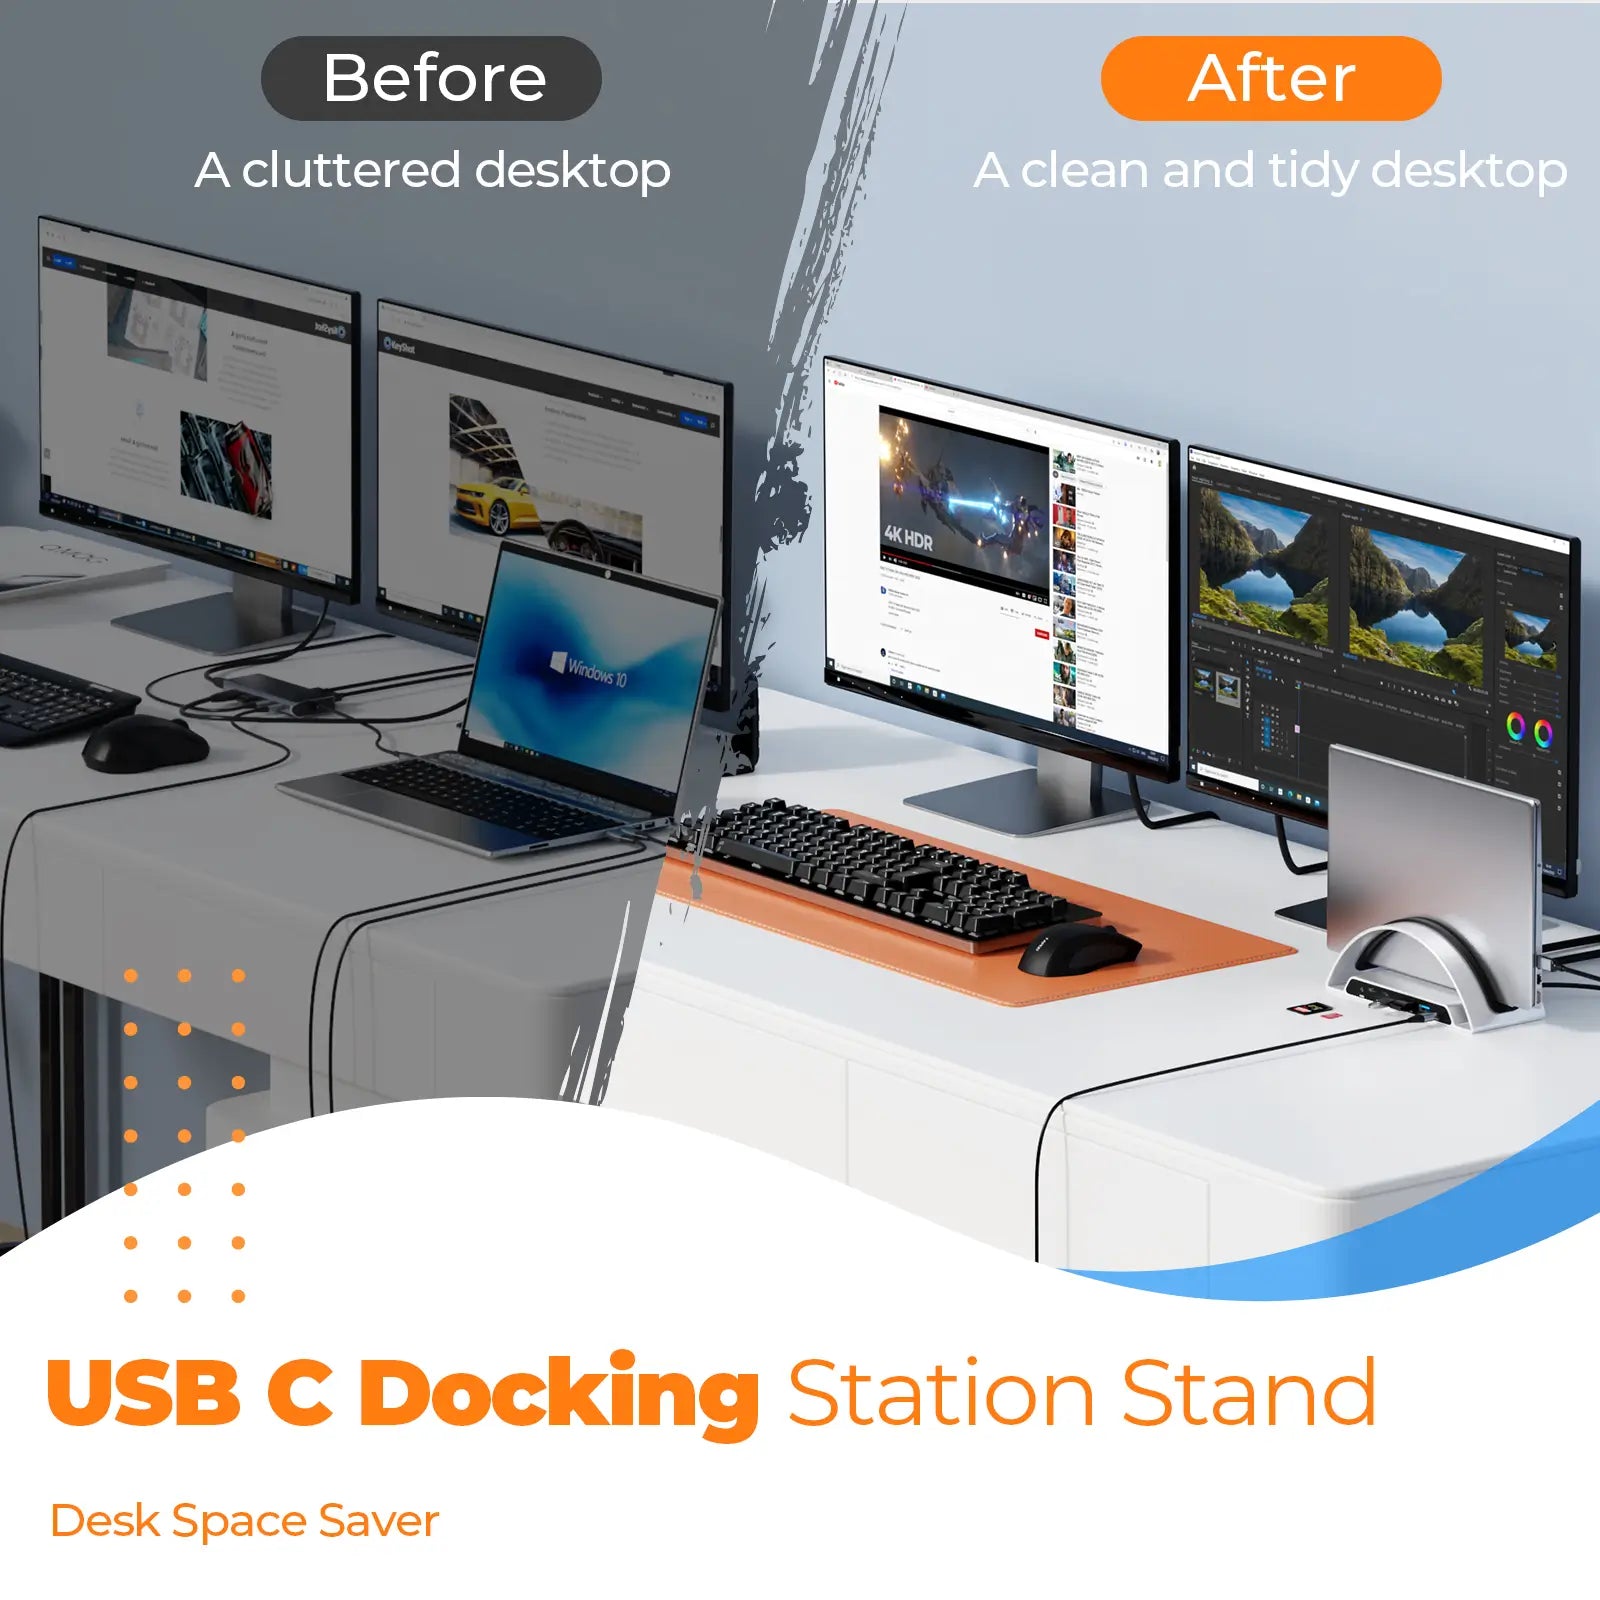 11 In 1 USB C docking station stand desk space aver